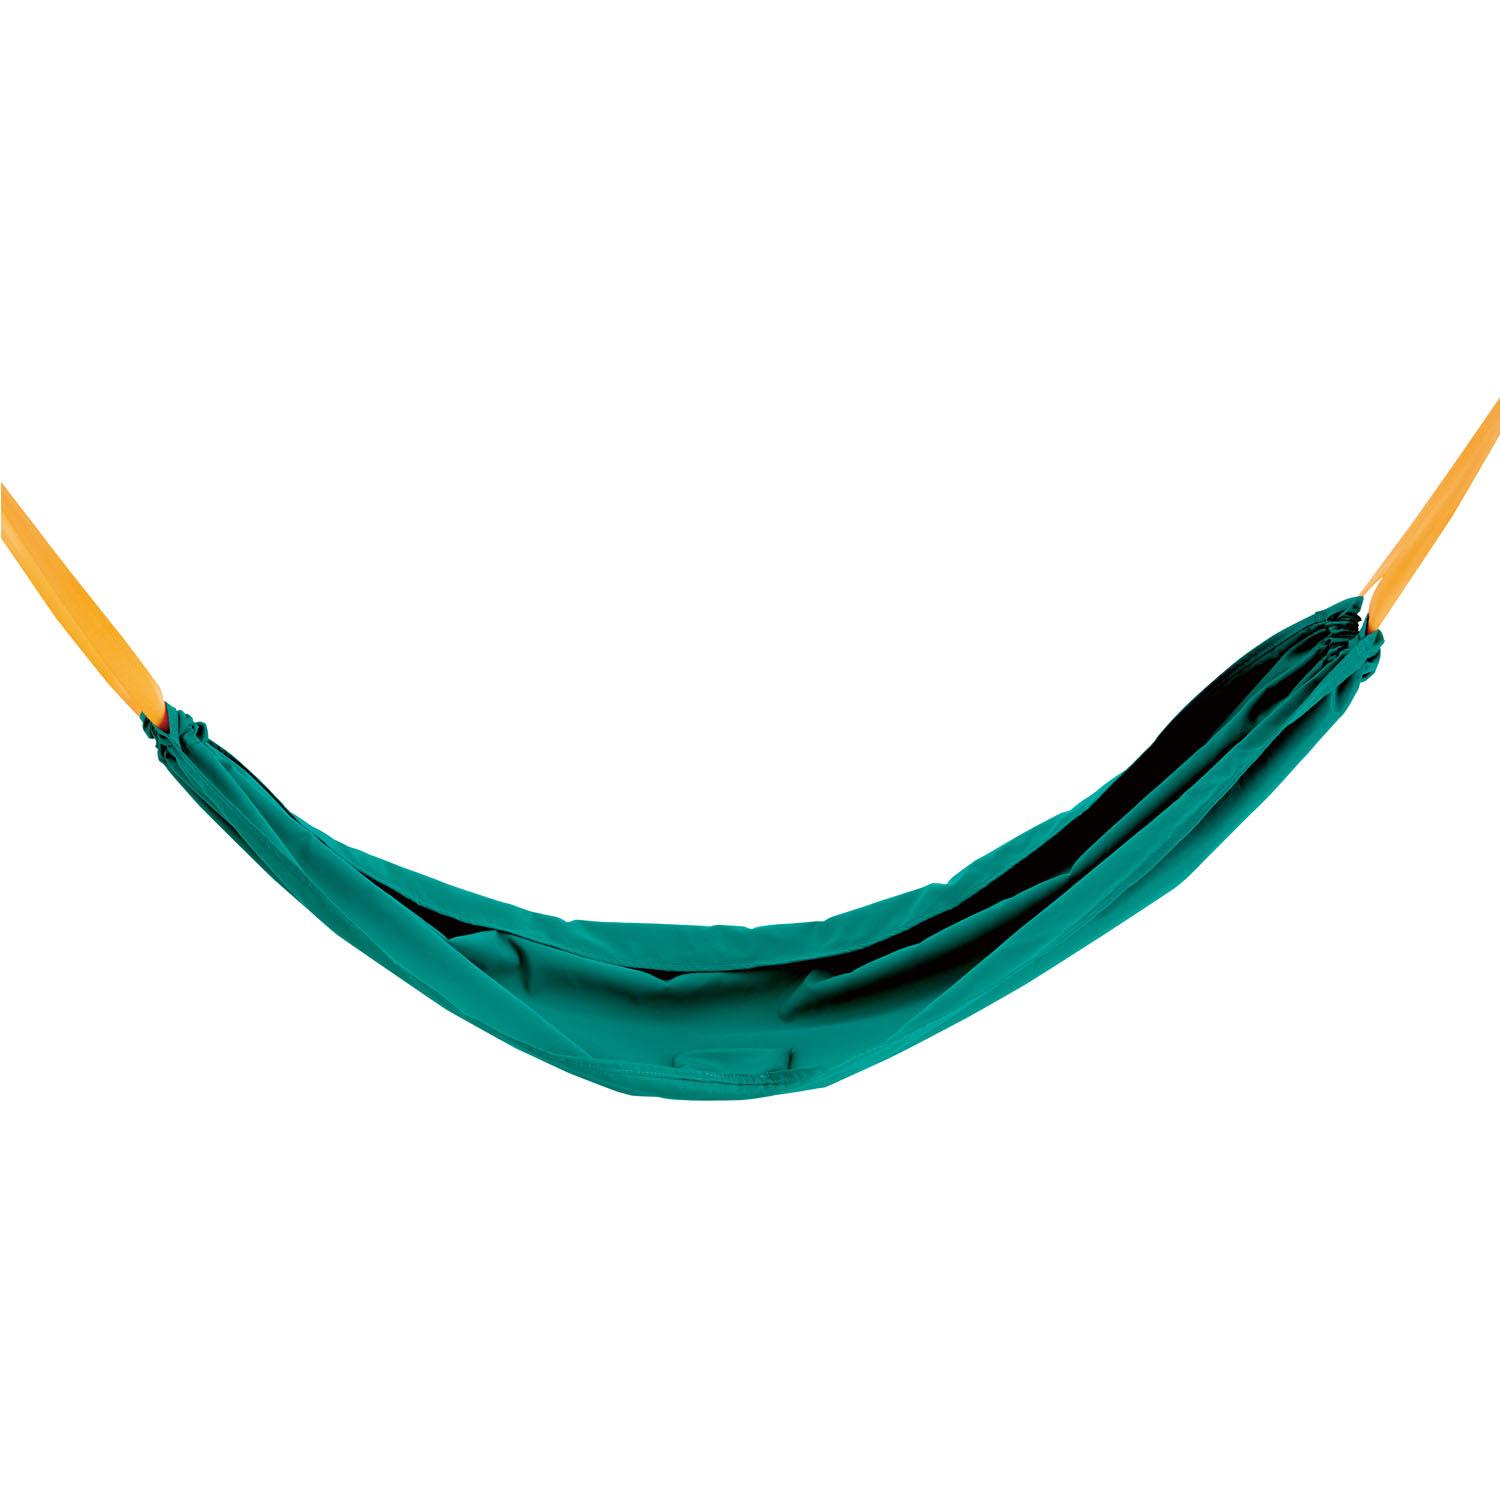 Green hammock swing with yellow straps on a white background.